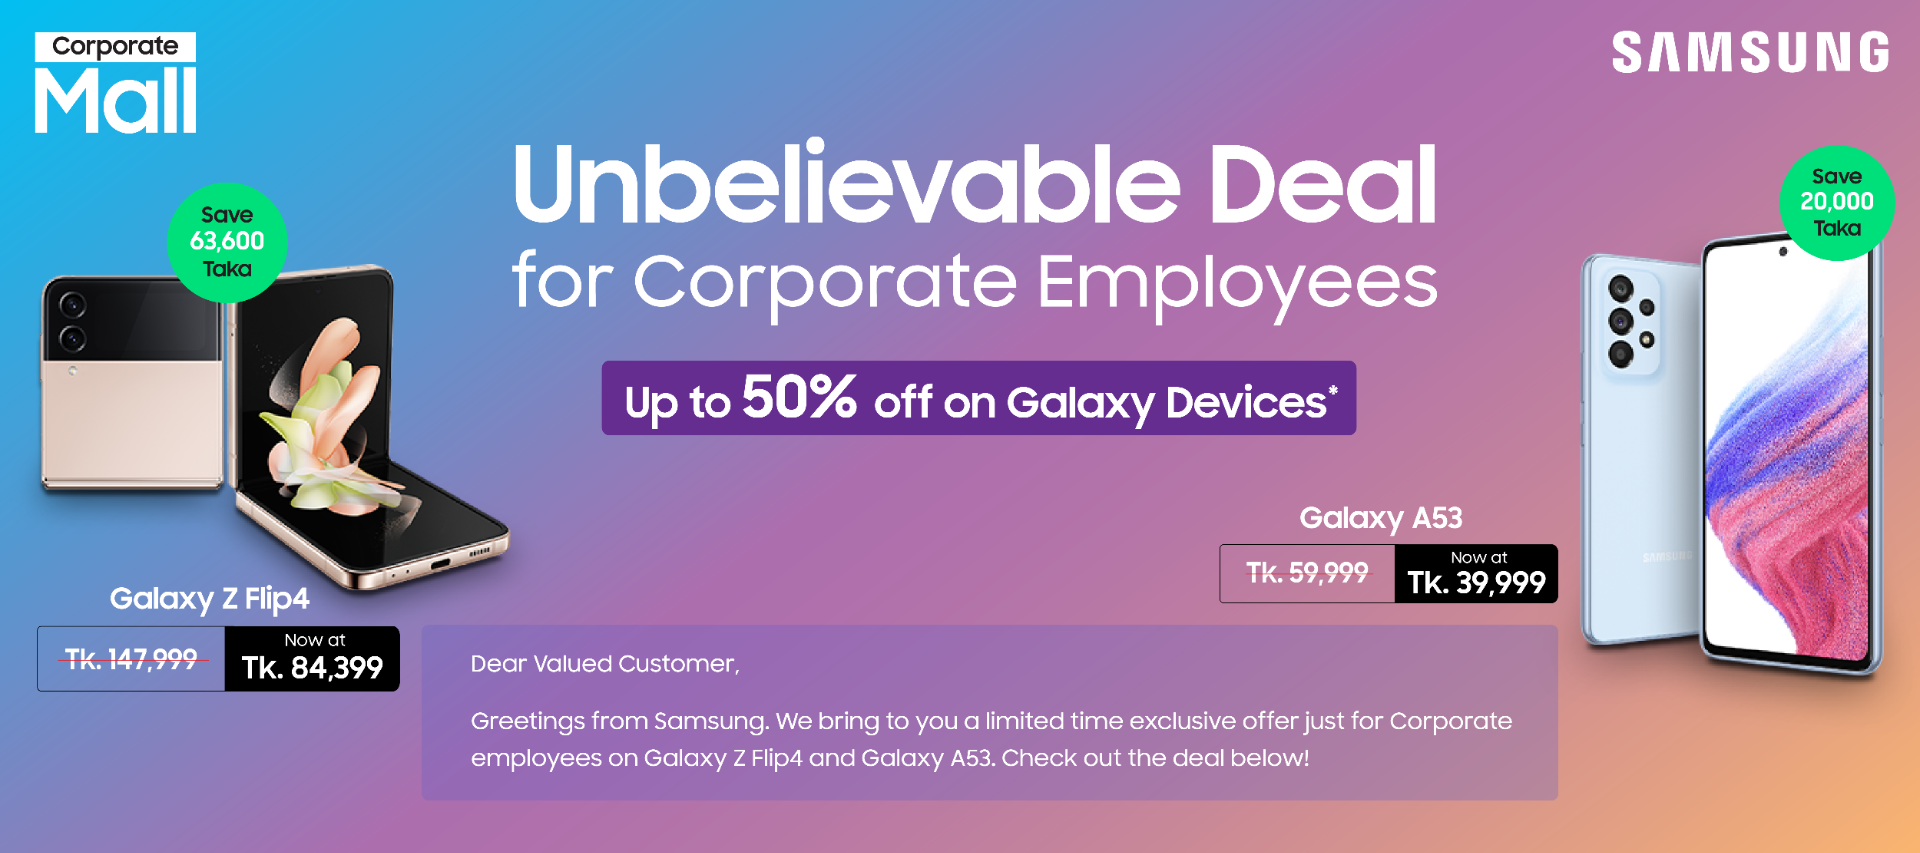 Join the Samsung Employee Offers program to access exclusive offers on selected Samsung products.